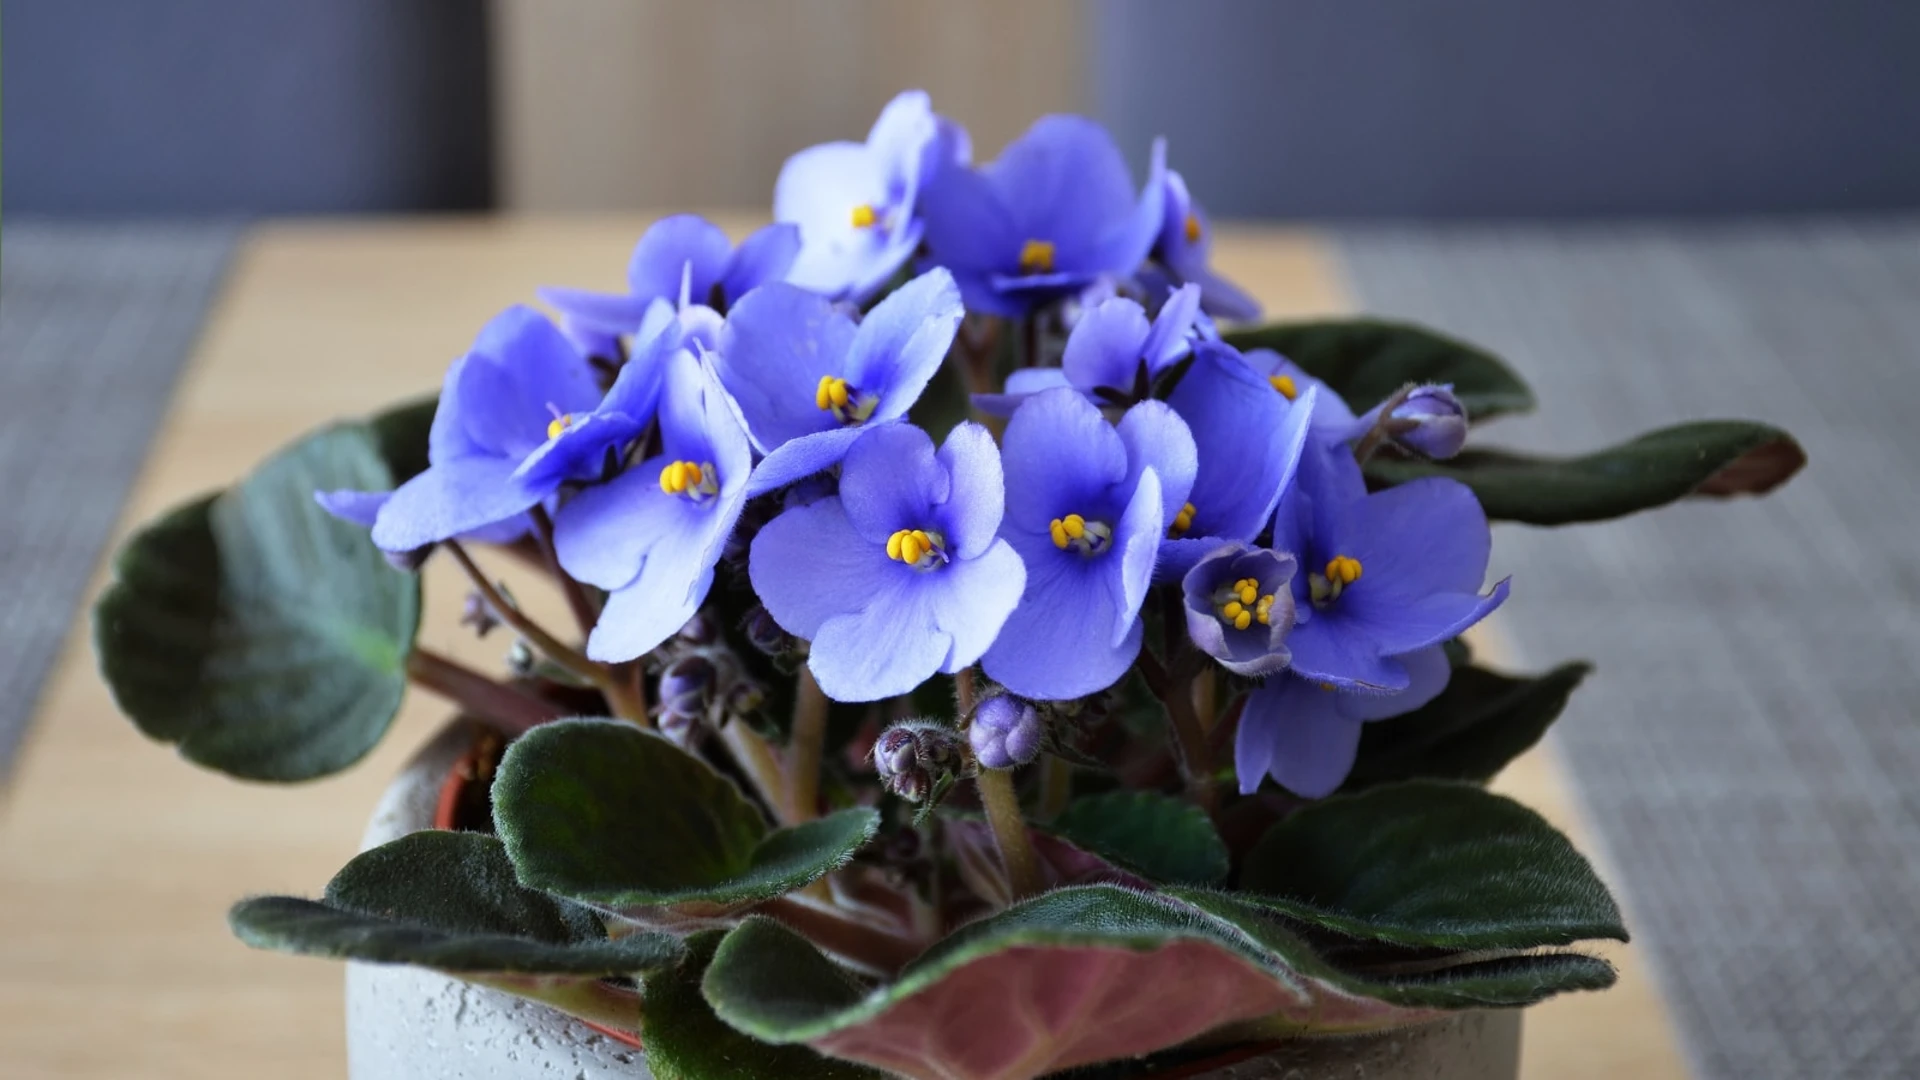 lovely flowers of african violet - the best indoor flowering plants to brighten up your living space